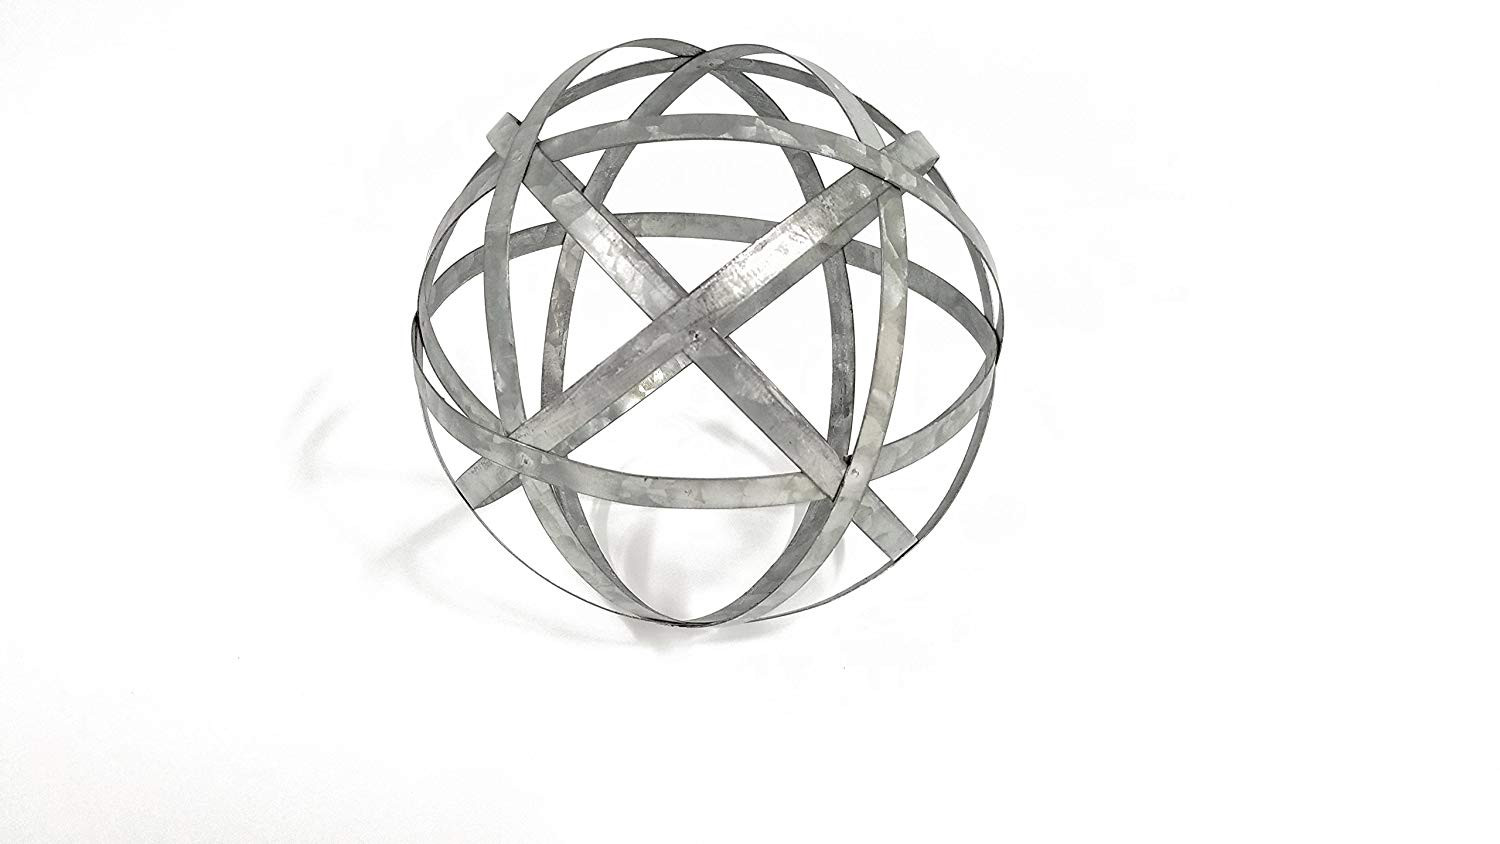 20 Trendy Galvanized Sheet Metal Vase 2024 free download galvanized sheet metal vase of cheap galvanized decorative beam find galvanized decorative beam intended for get quotations ac2b7 large galvanized metal band decorative sphere